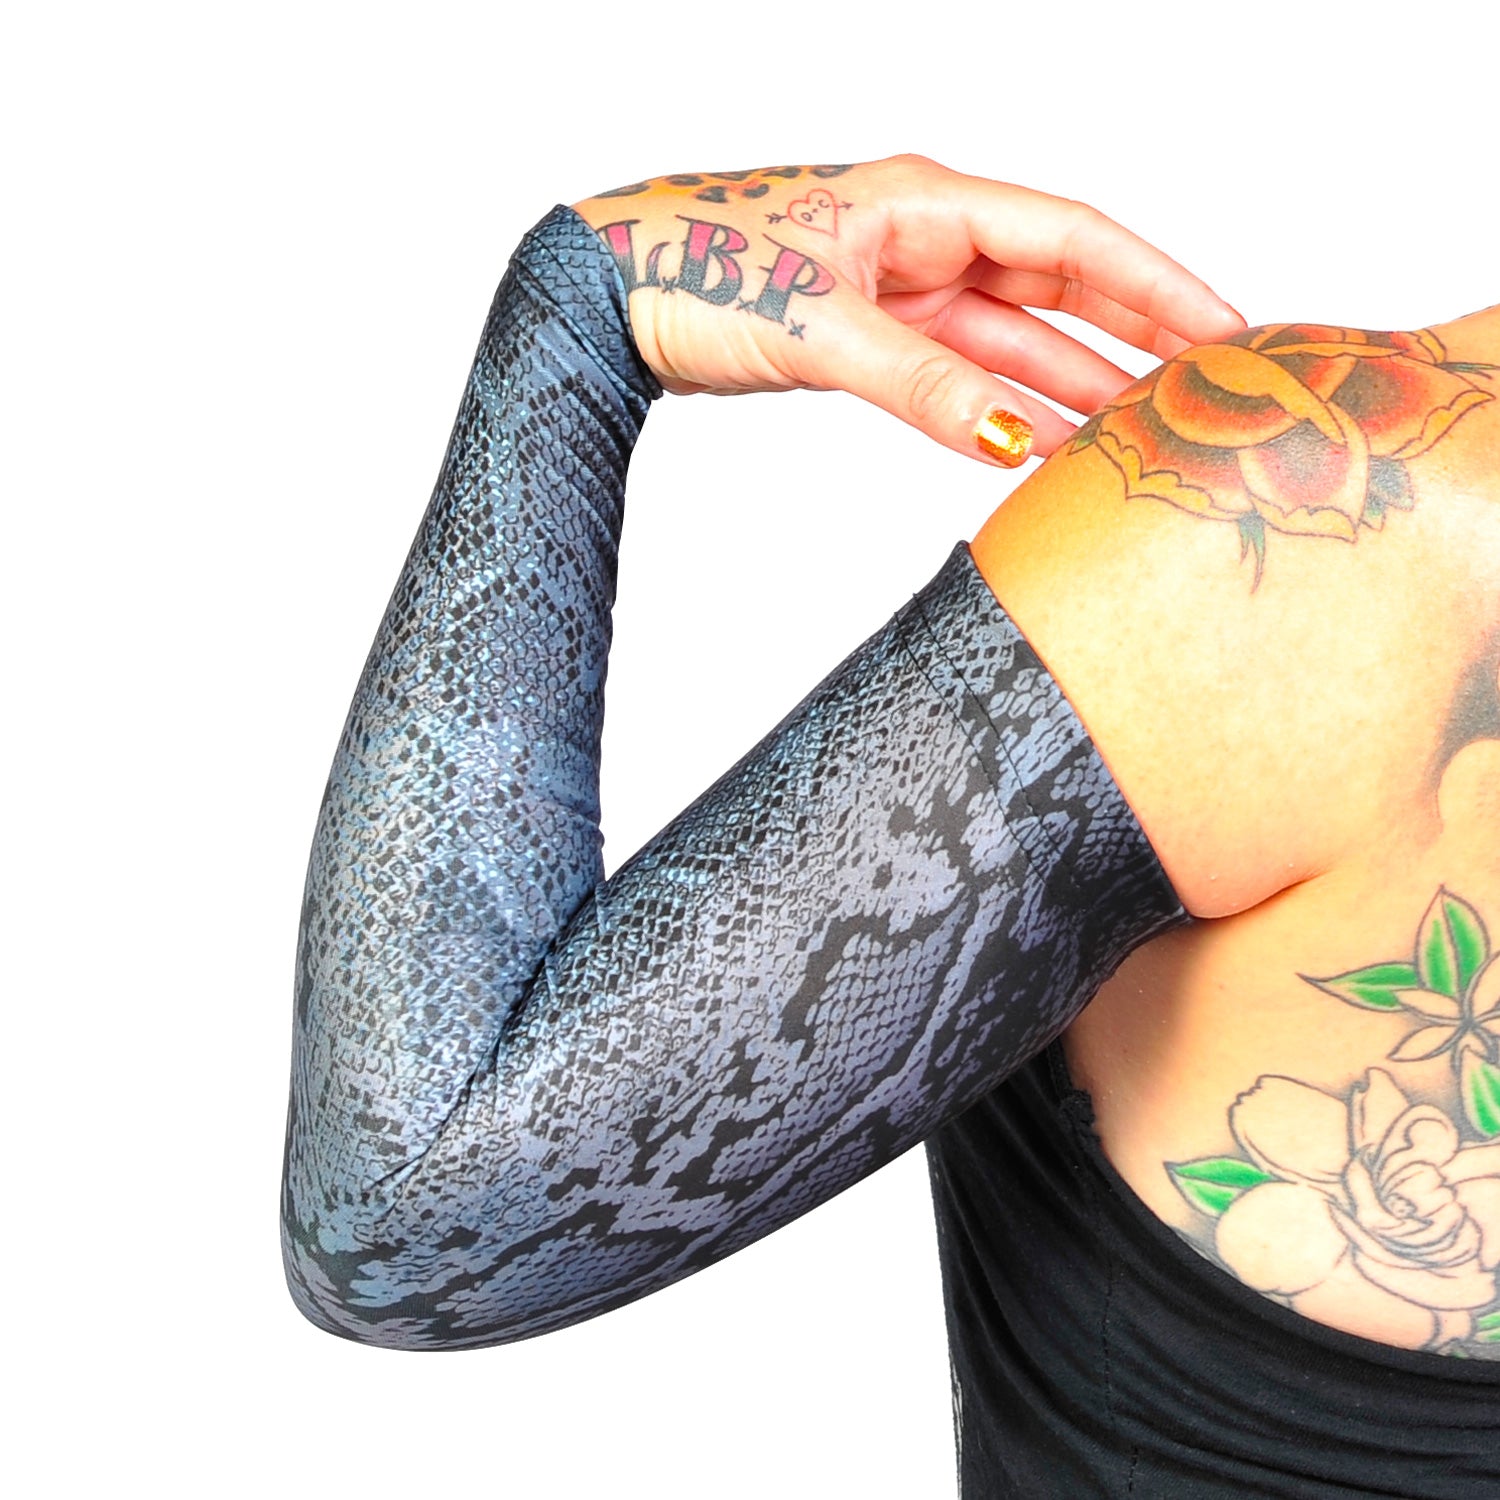 Ink Armor Tattoo Cover Up Sleeve - Full Arm Sleeve (Snake Grey)